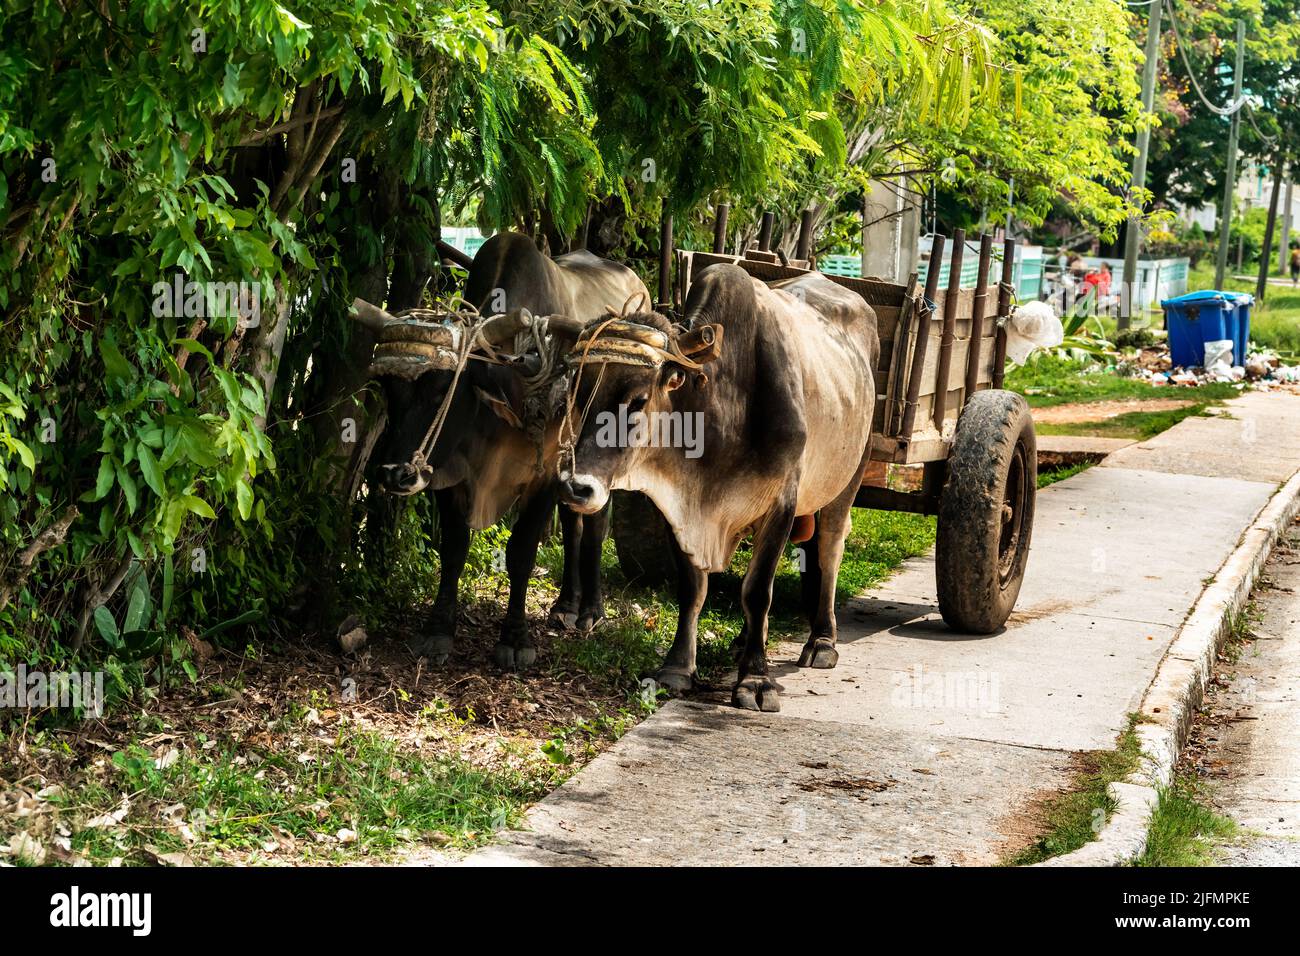 Two domesticated oxen tied up together to a wooden homemade wagon, they have their horns cut off. Stock Photo